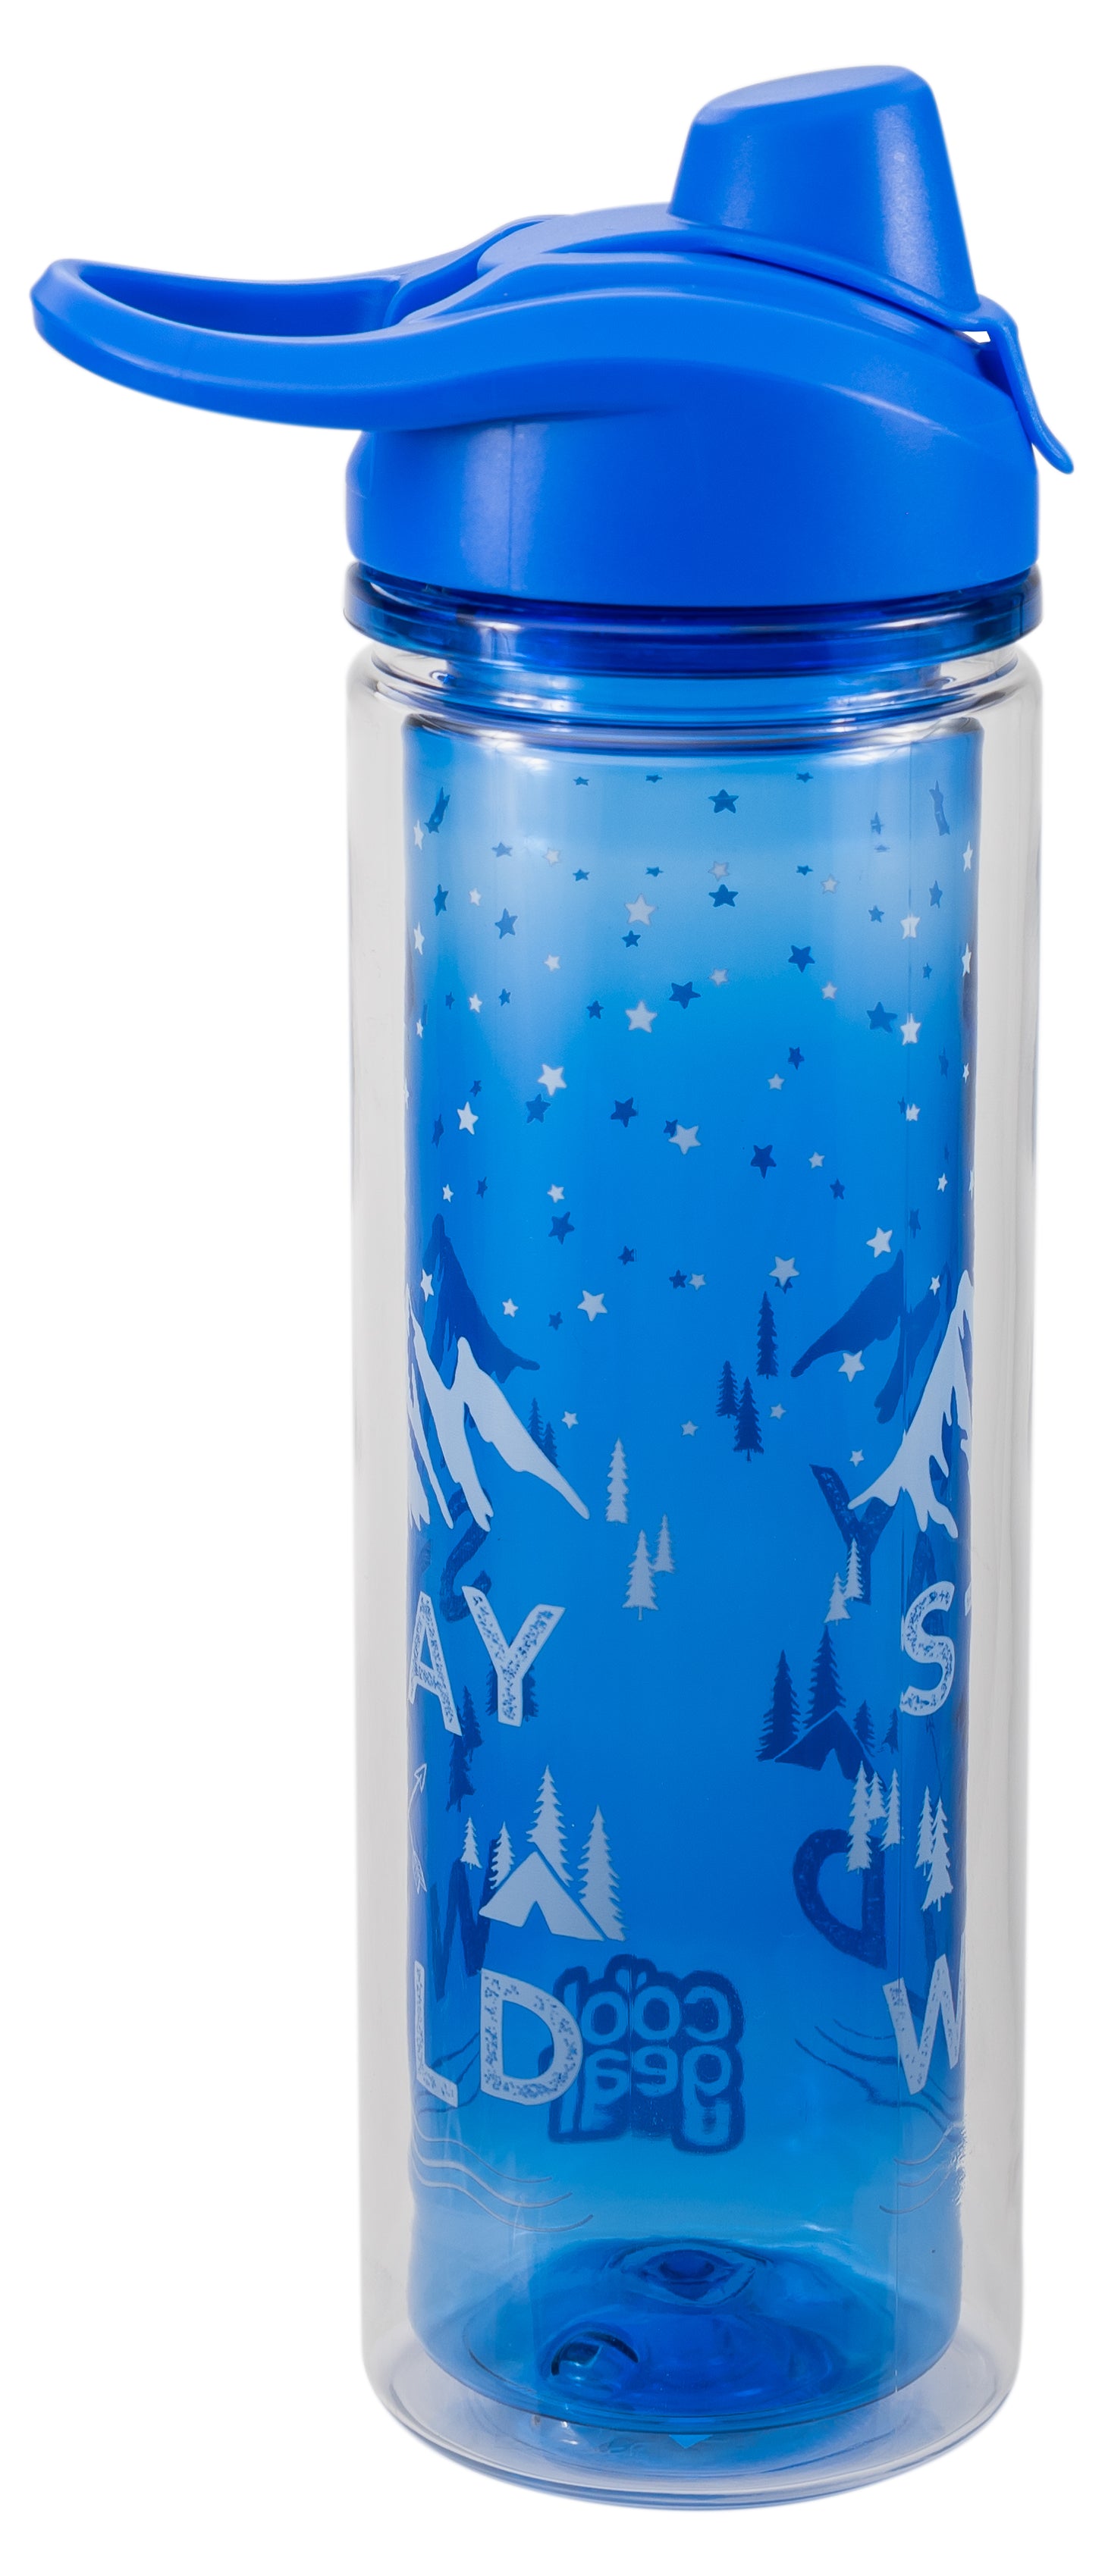 COOL GEAR 2-Pack 20 oz Essence Chugger Water Bottle with Wide Mouth & Flip Cap Design - Unicorn/Leaves - image 2 of 6